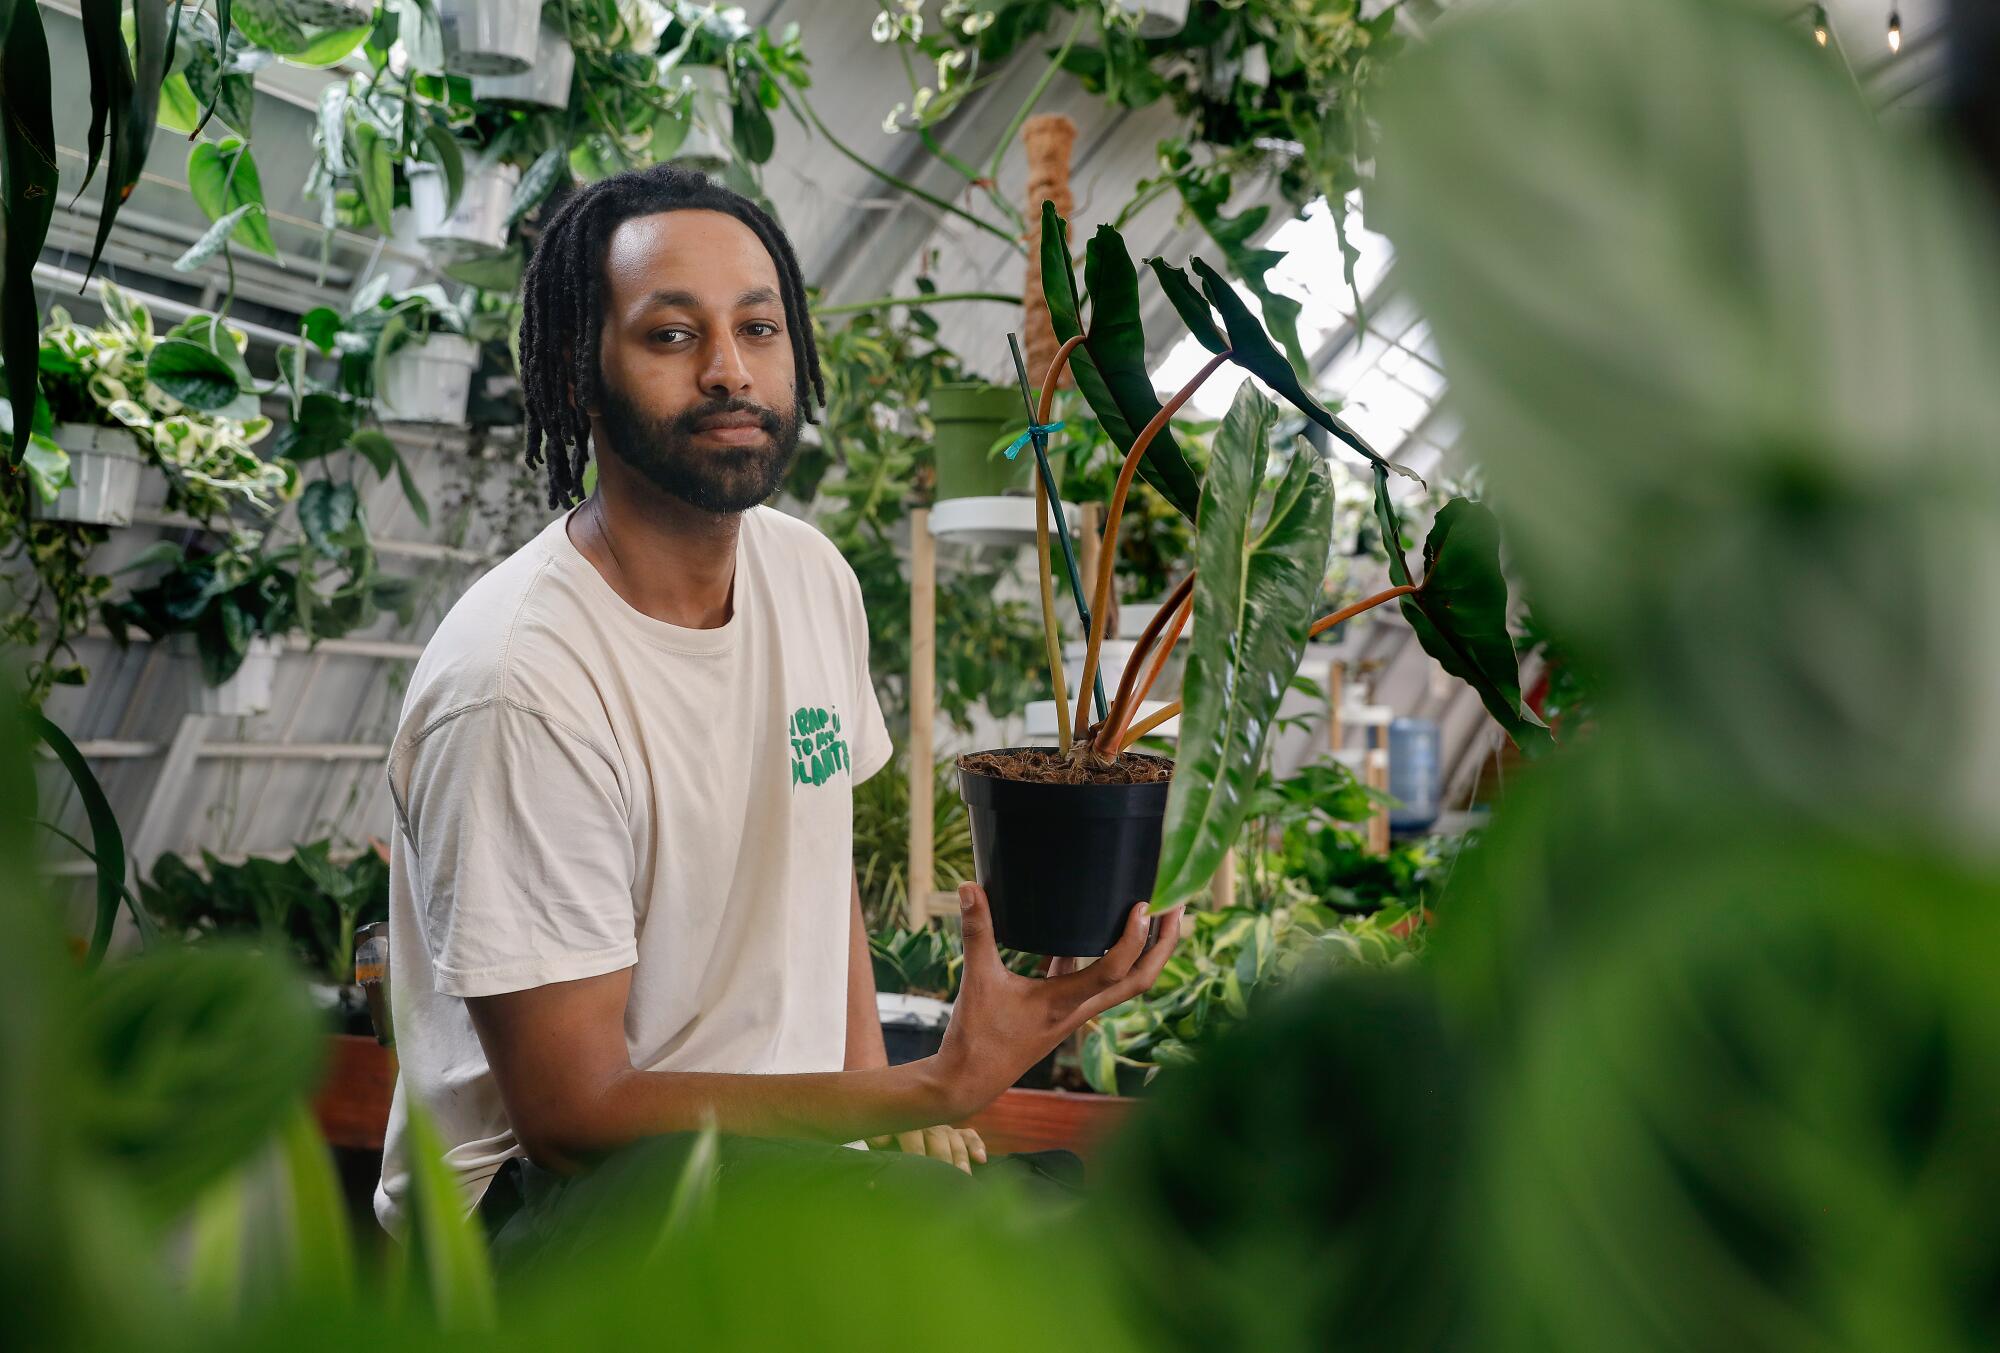 A man in a T-shirt stands among plants in his shop, holding up a potted plant.